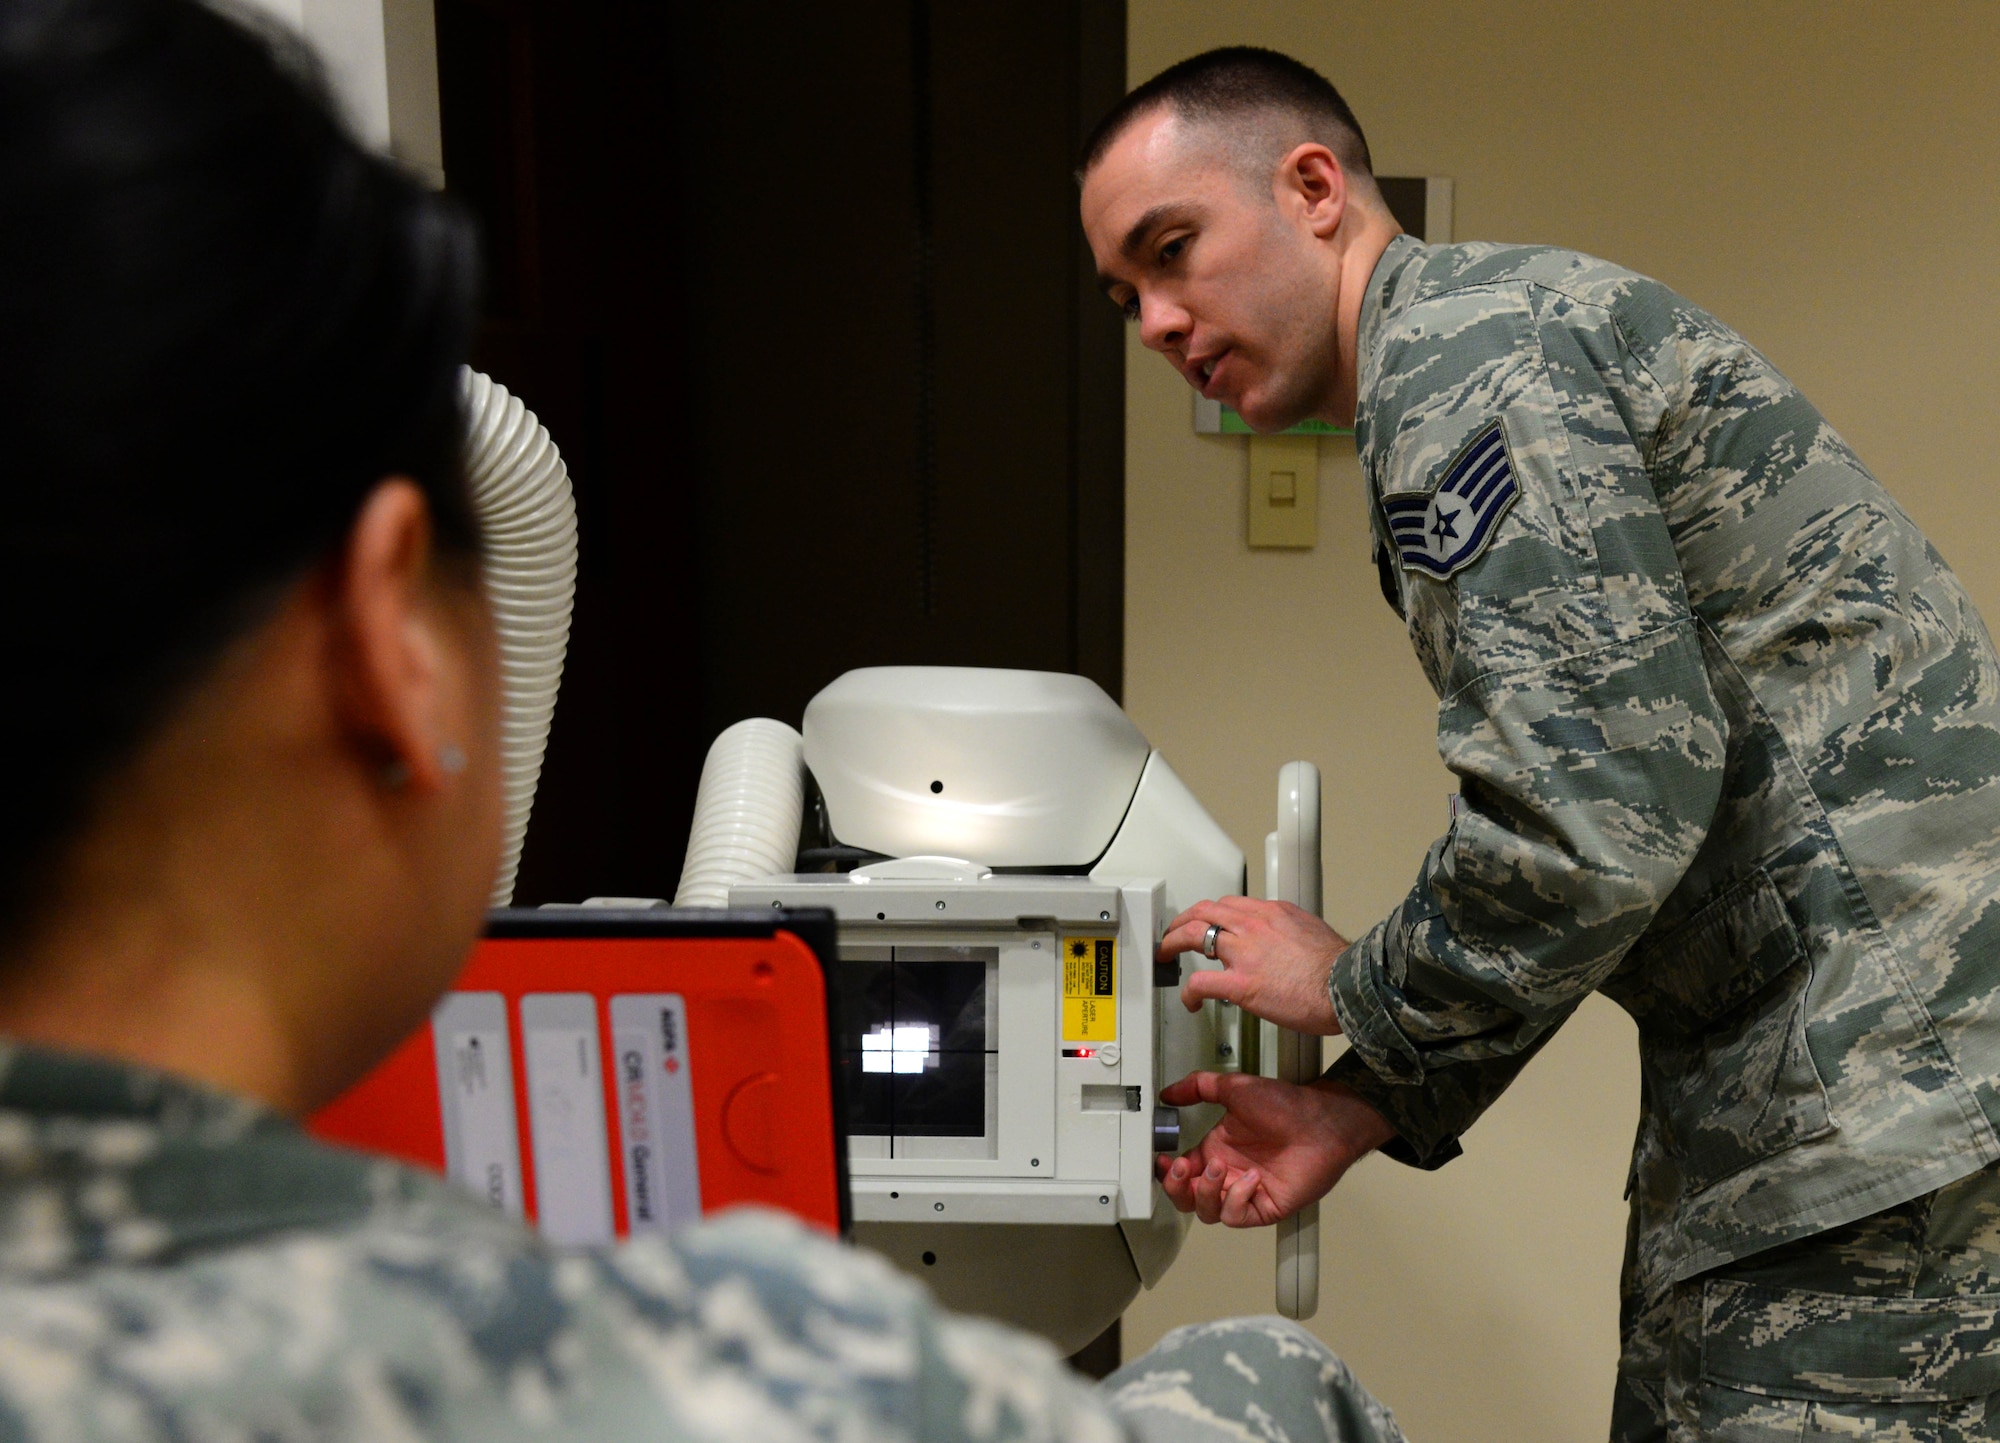 Staff Sgt. Ryan Gulland, a 28th Medical Support Squadron diagnostic imaging technician, captures a “sunrise” X-ray image of Master Sgt. Mia Newmeyer, 28th MDSS diagnostic imaging noncommissioned officer in charge, inside the 28th Medical Group at Ellsworth Air Force Base, S.D., May 11, 2018. This X-ray image is captured by positioning the patient with the knees slightly bent and an x-ray cassette placed behind the knee being examined, so the produced image gives the appearance of a sunrise. (U.S. Air Force photo by Senior Airman Denise Jenson)